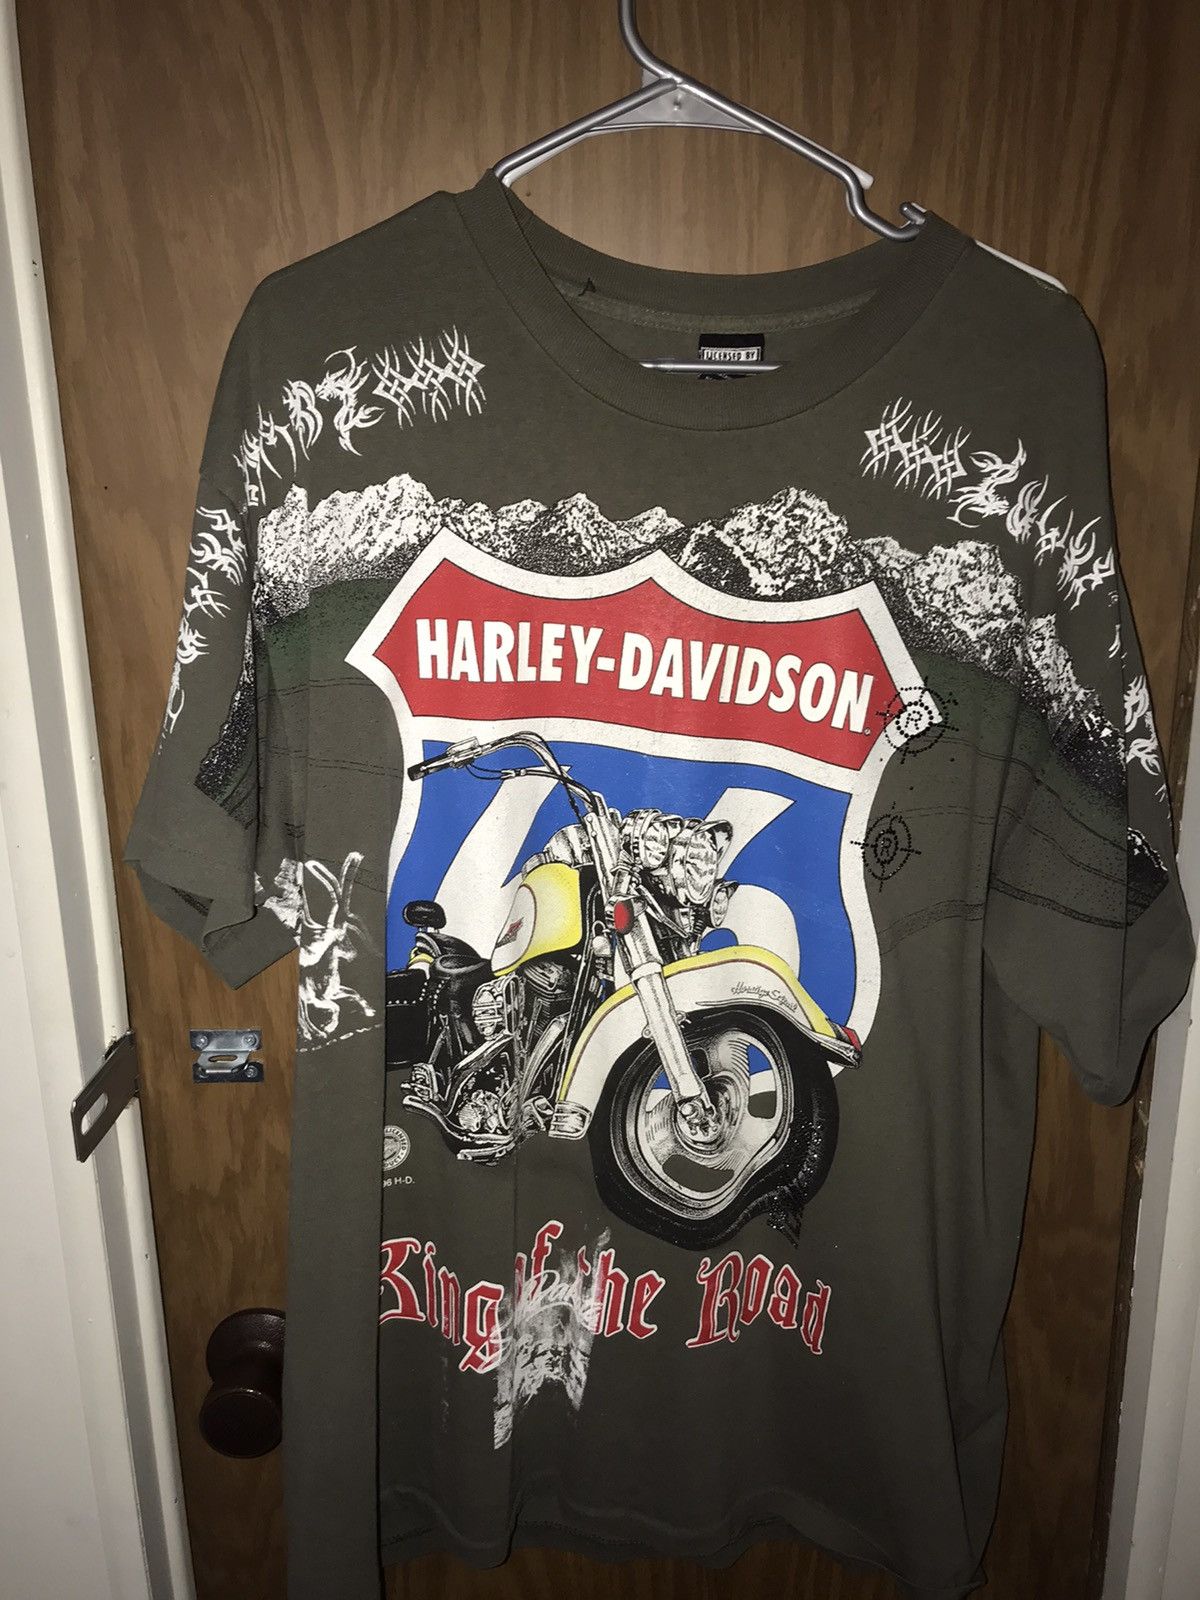 Vintage Harley Davidson X Year 2000 King Of The Road T Shirt Size US XL / EU 56 / 4 - 1 Preview